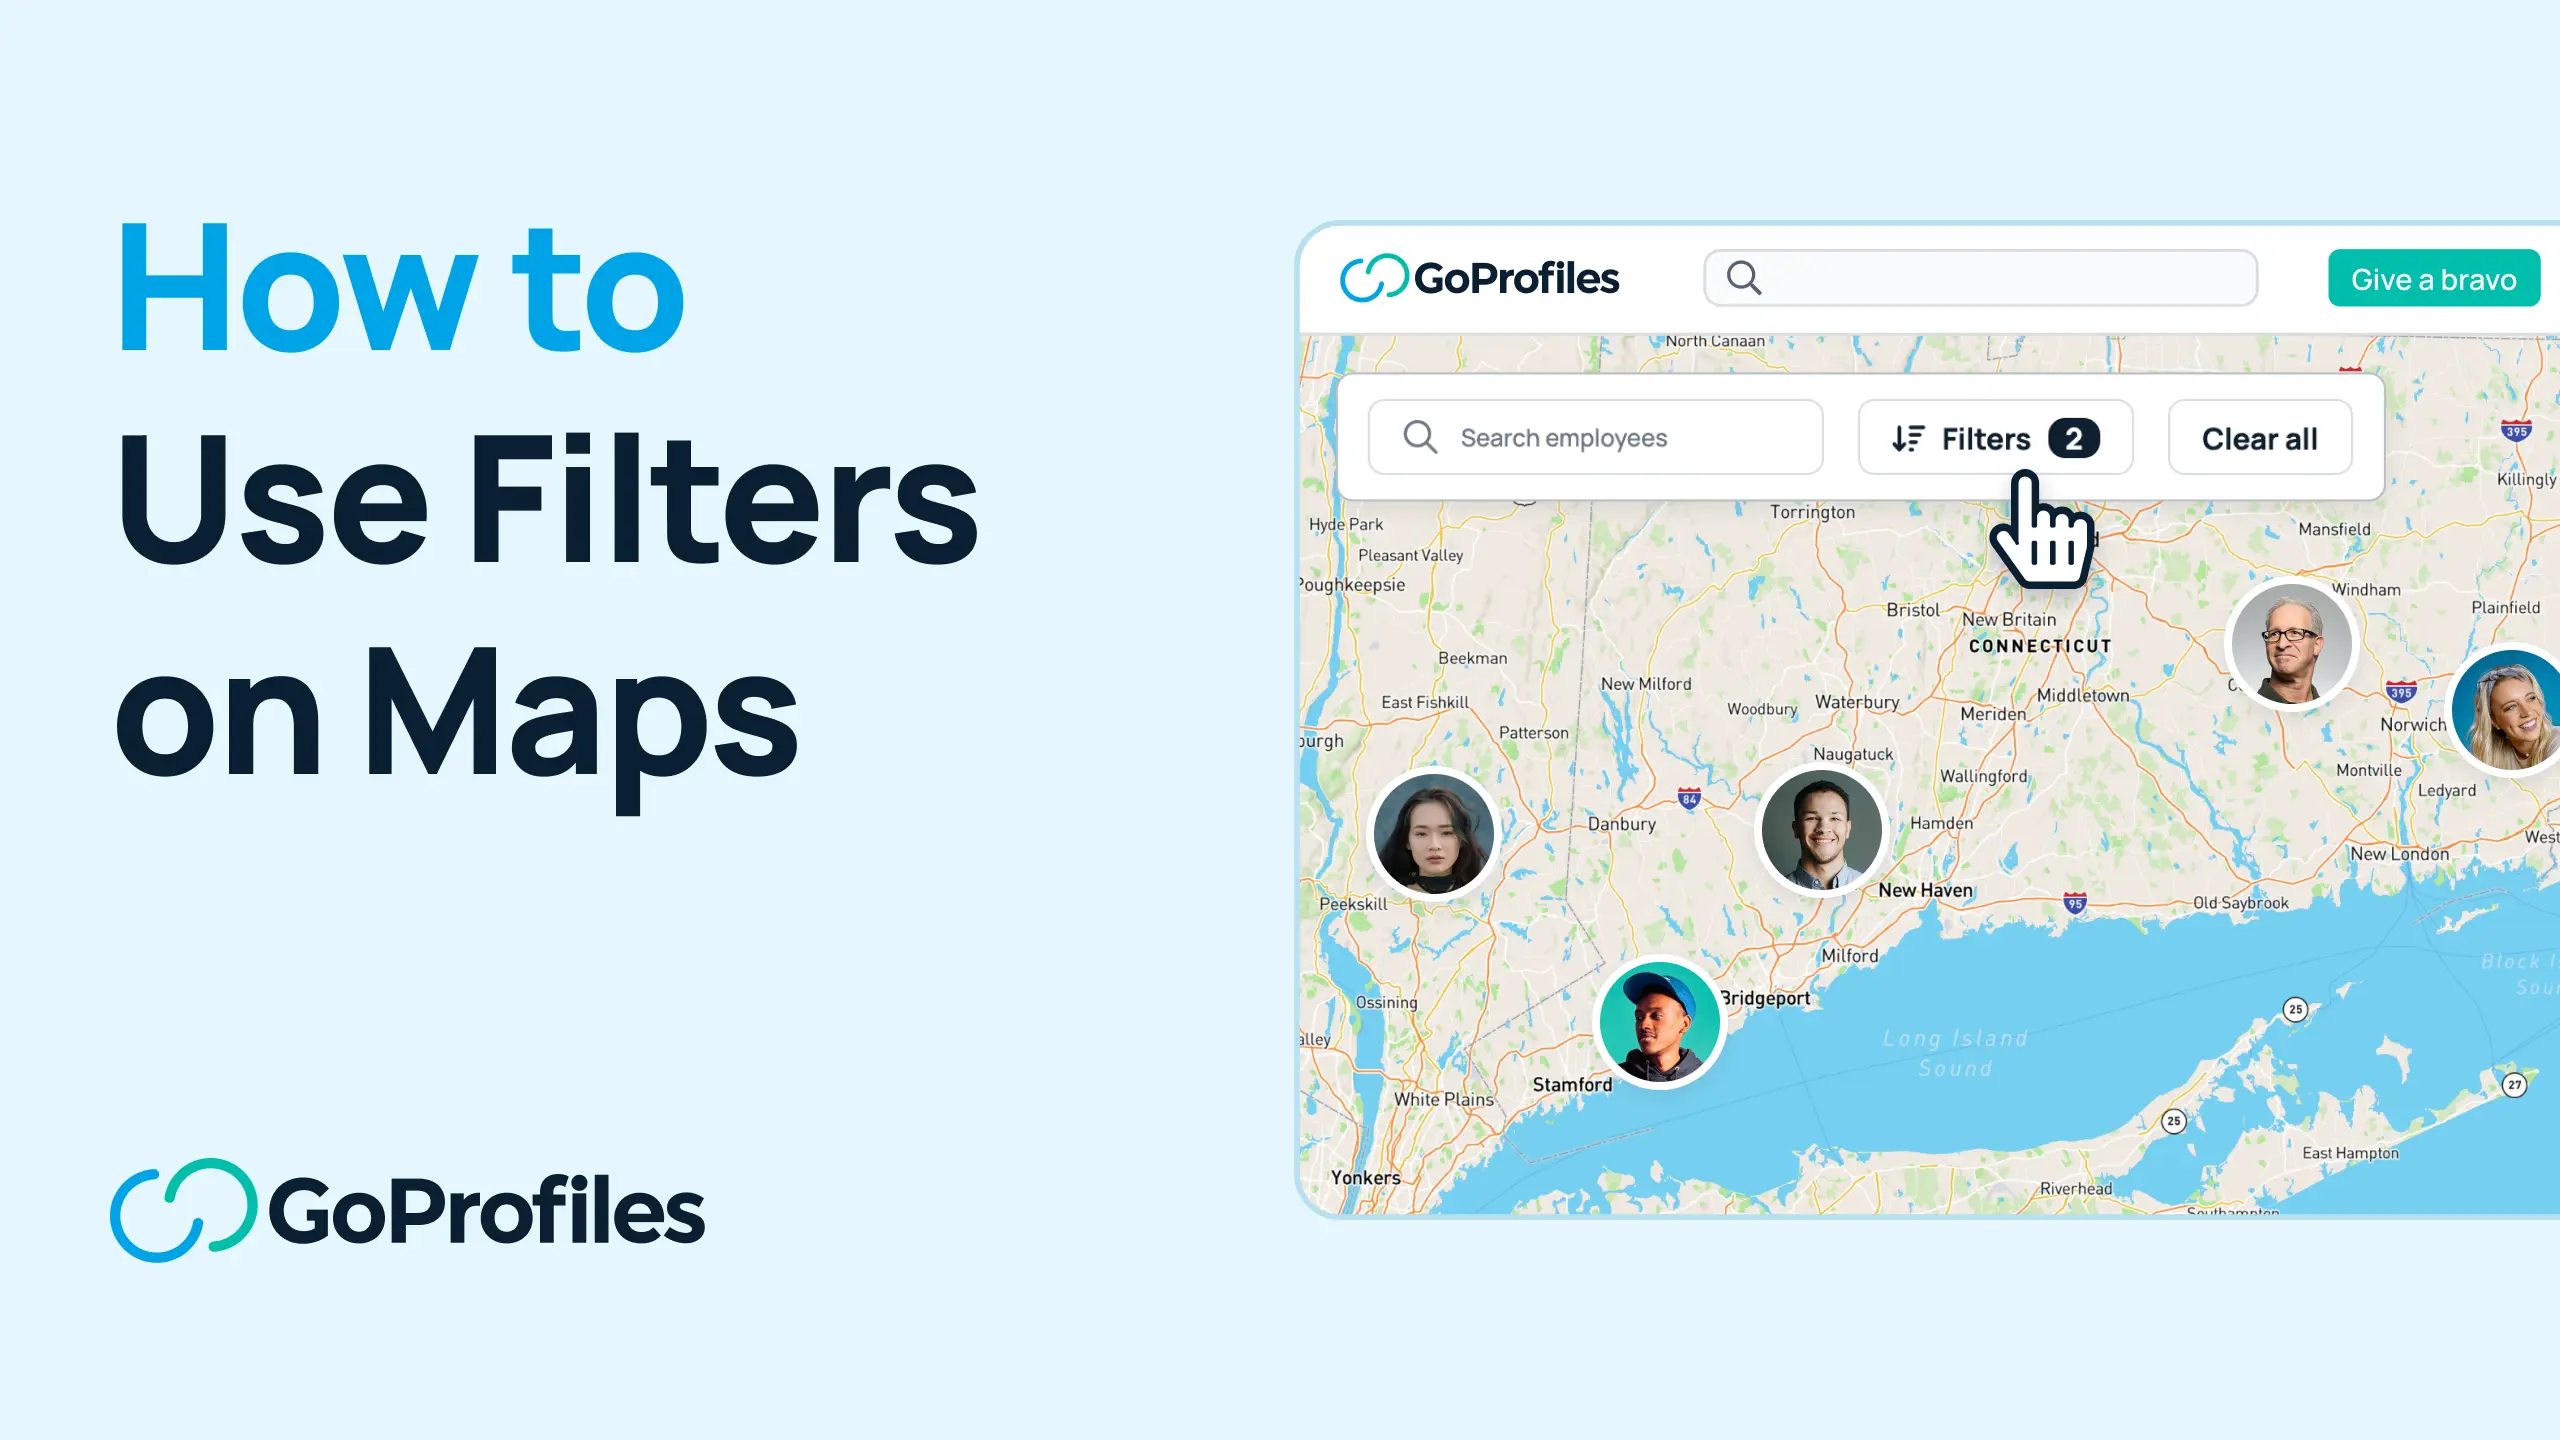 GoProfiles Employee Map: How to Use Filters to Find Coworkers